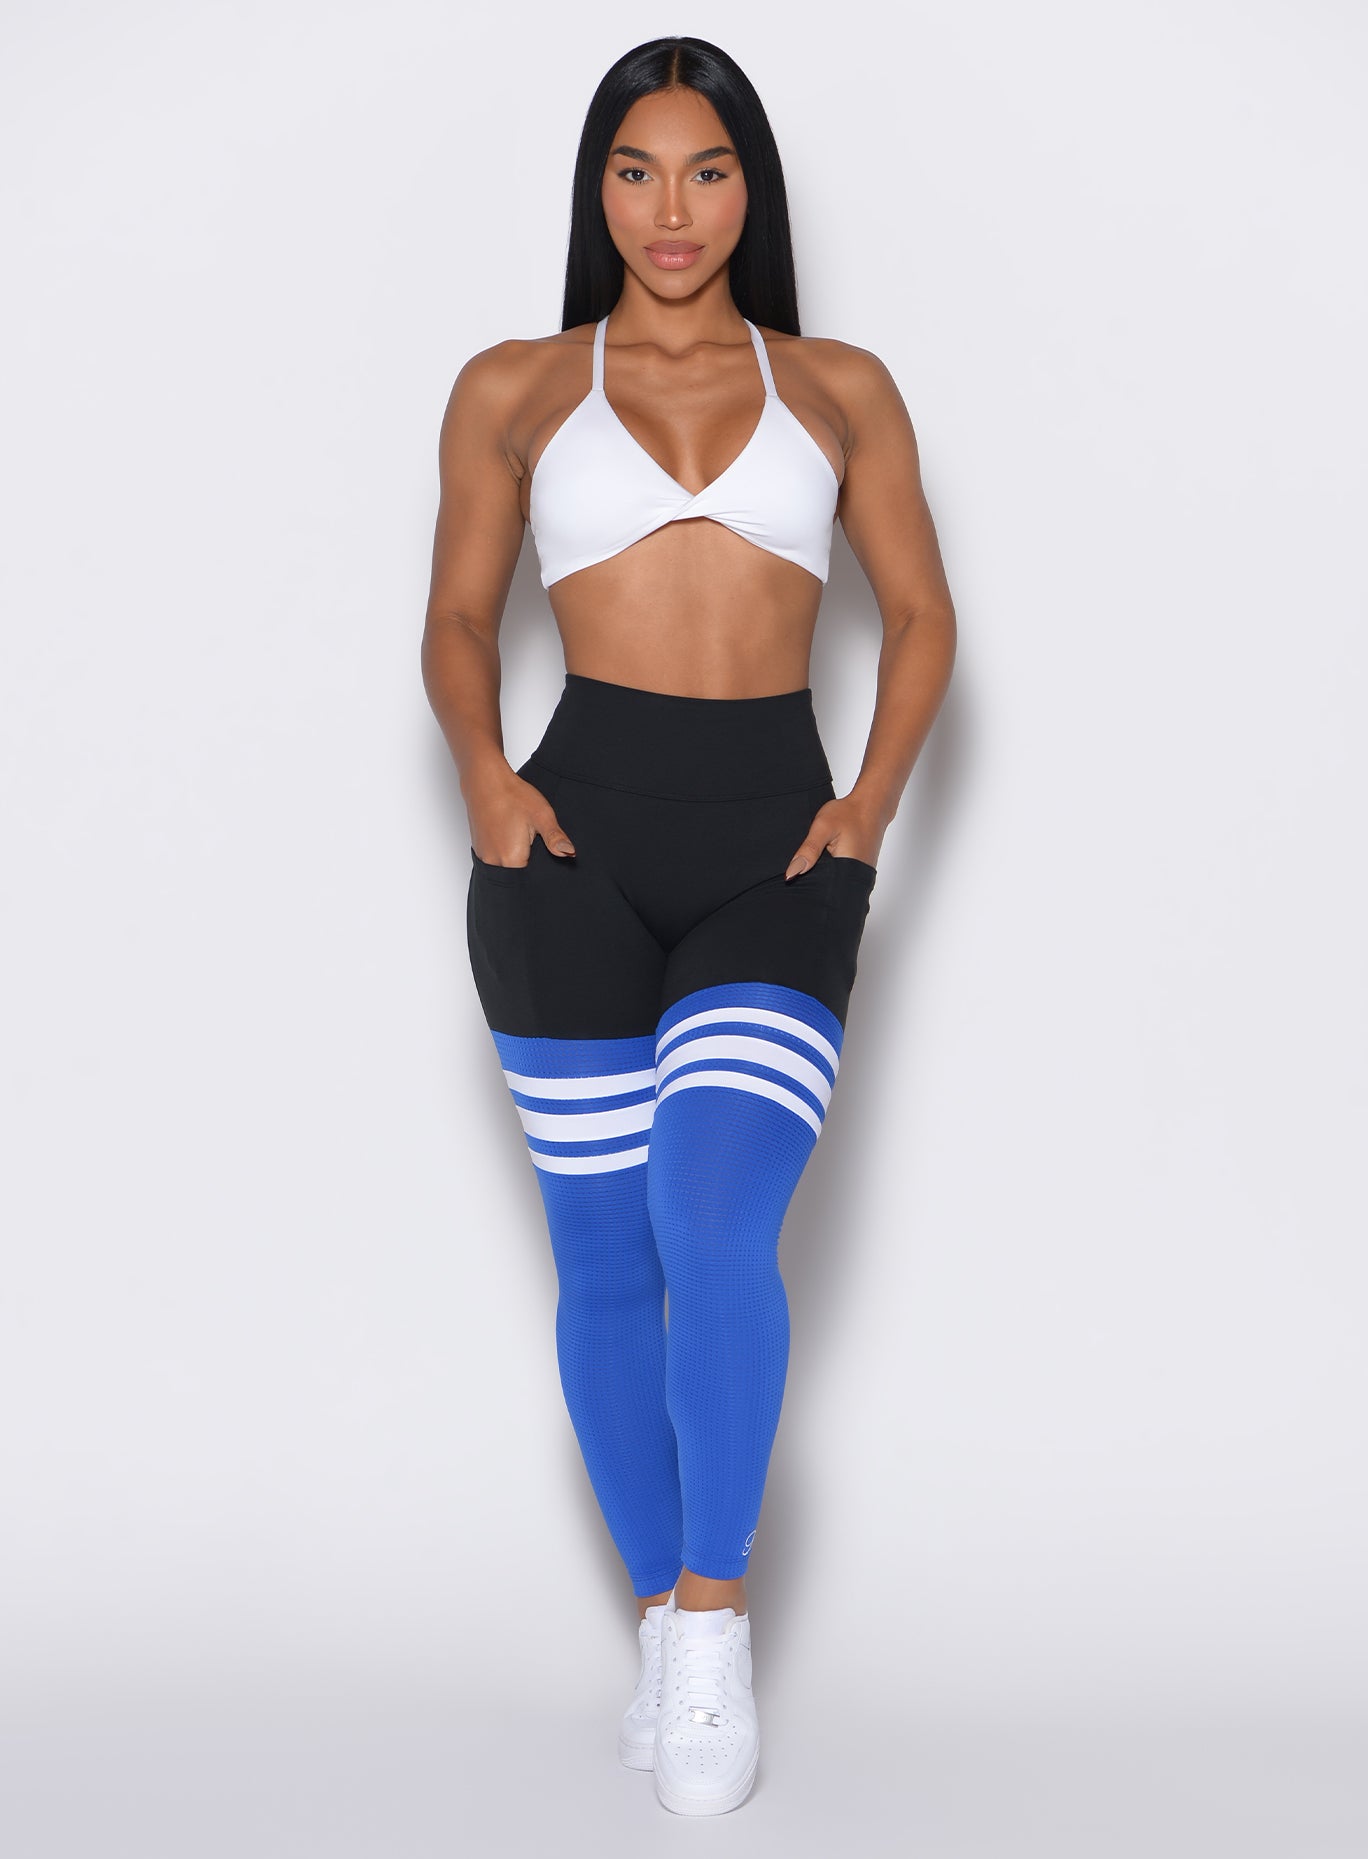 Front profile shot of a model with both hands in the pockets wearing the Perform Thigh Highs in Black Sky color along with a white sports bra